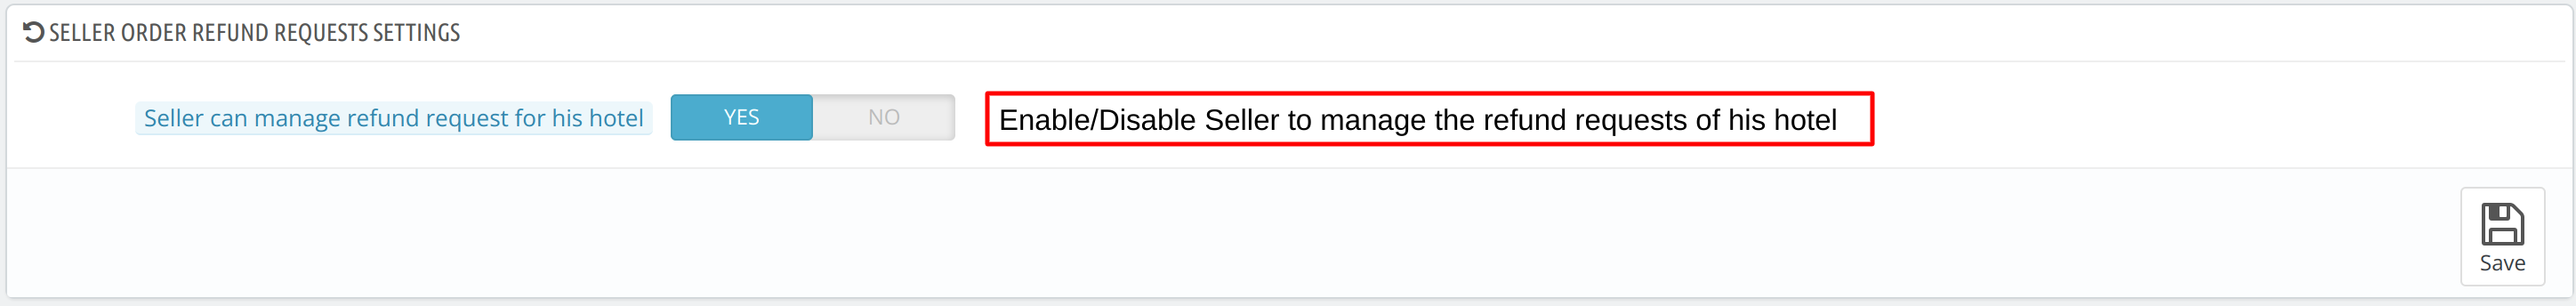 Seller Order Refund Requests Settings